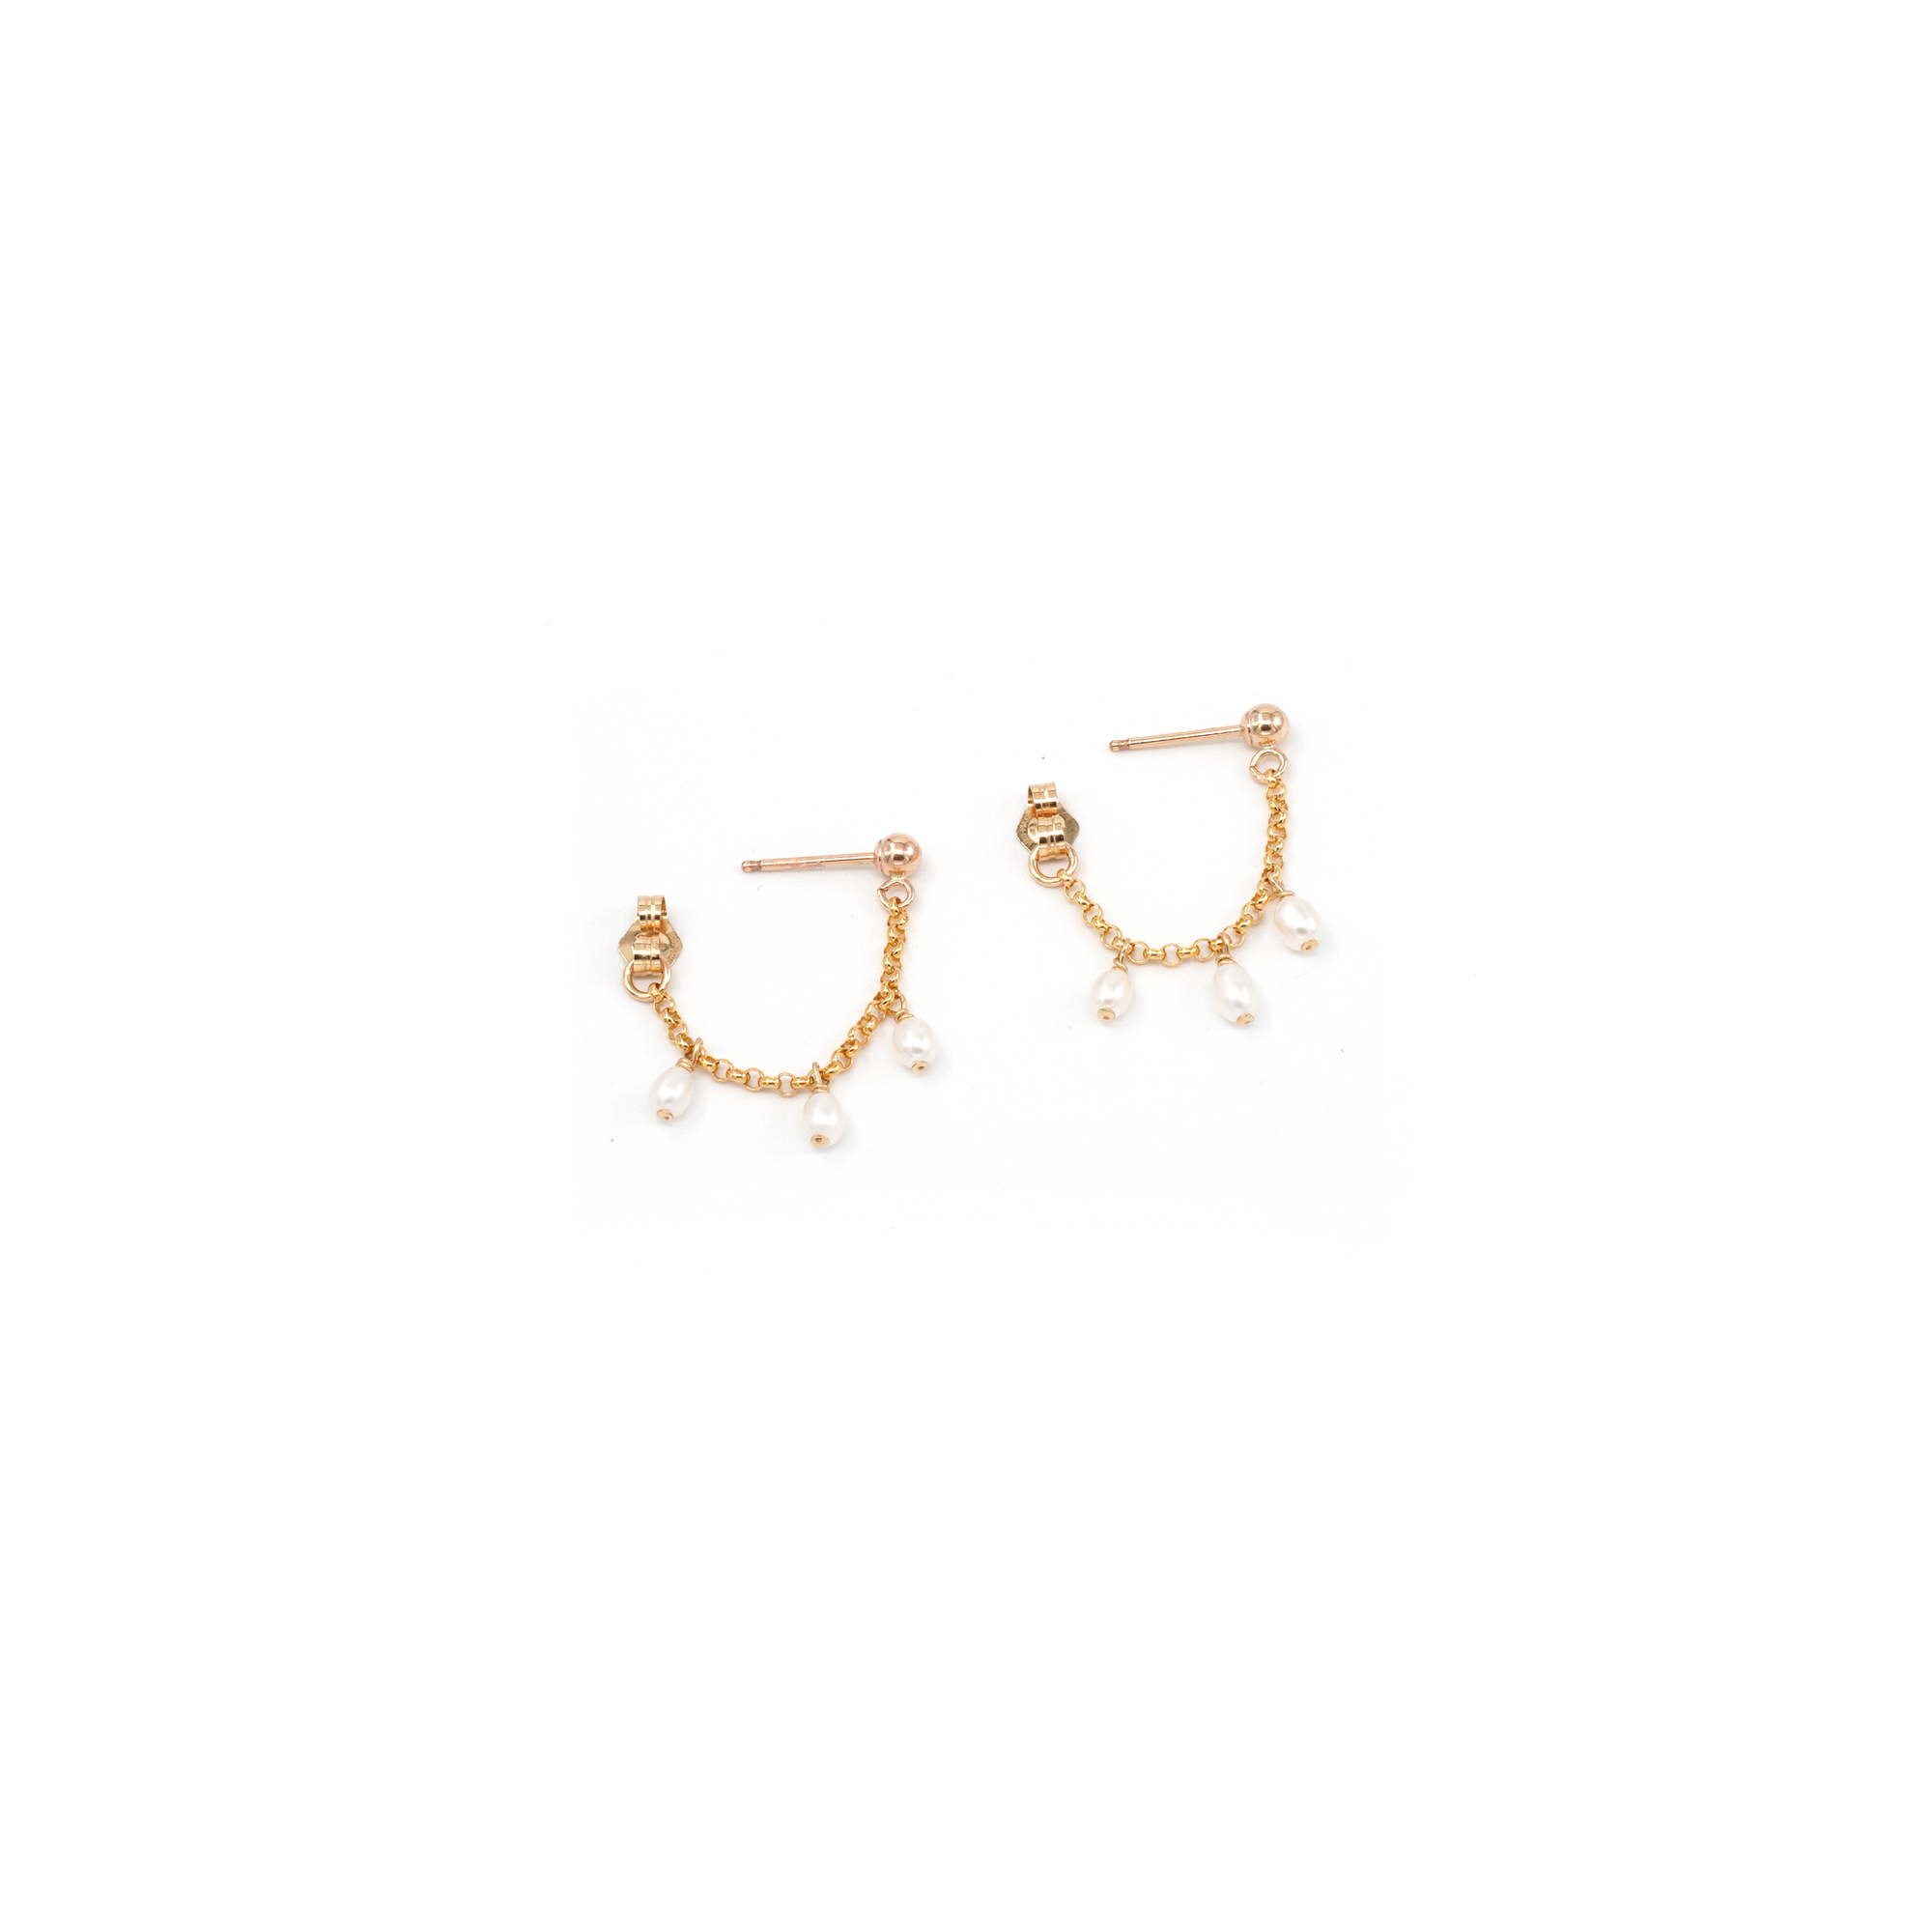 The Delfina Earrings by May Martin